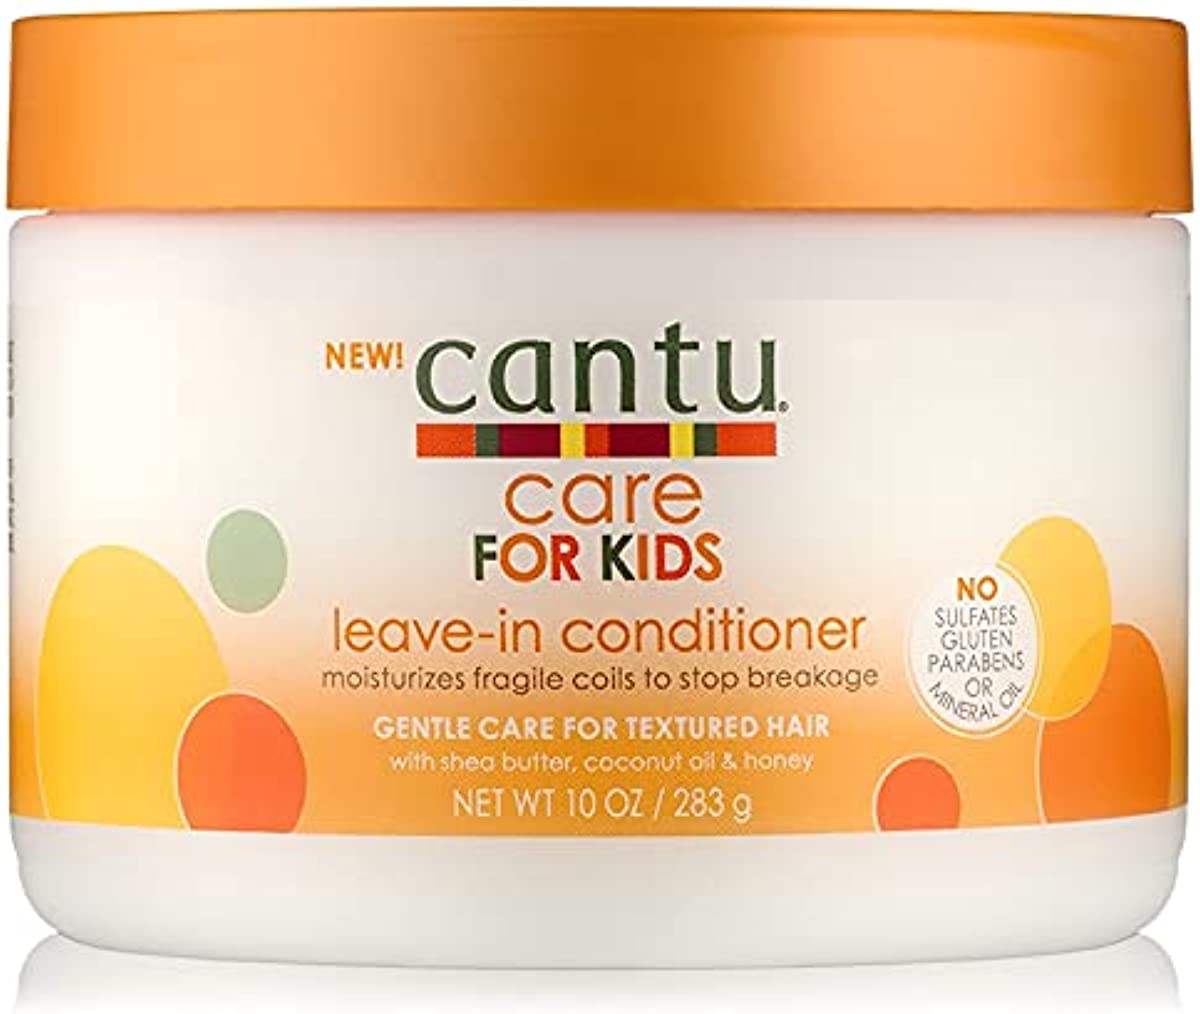 Cantu Care for Kids Nourishing Shampoo & Conditioner & Leave-in Conditioner\"Set\"